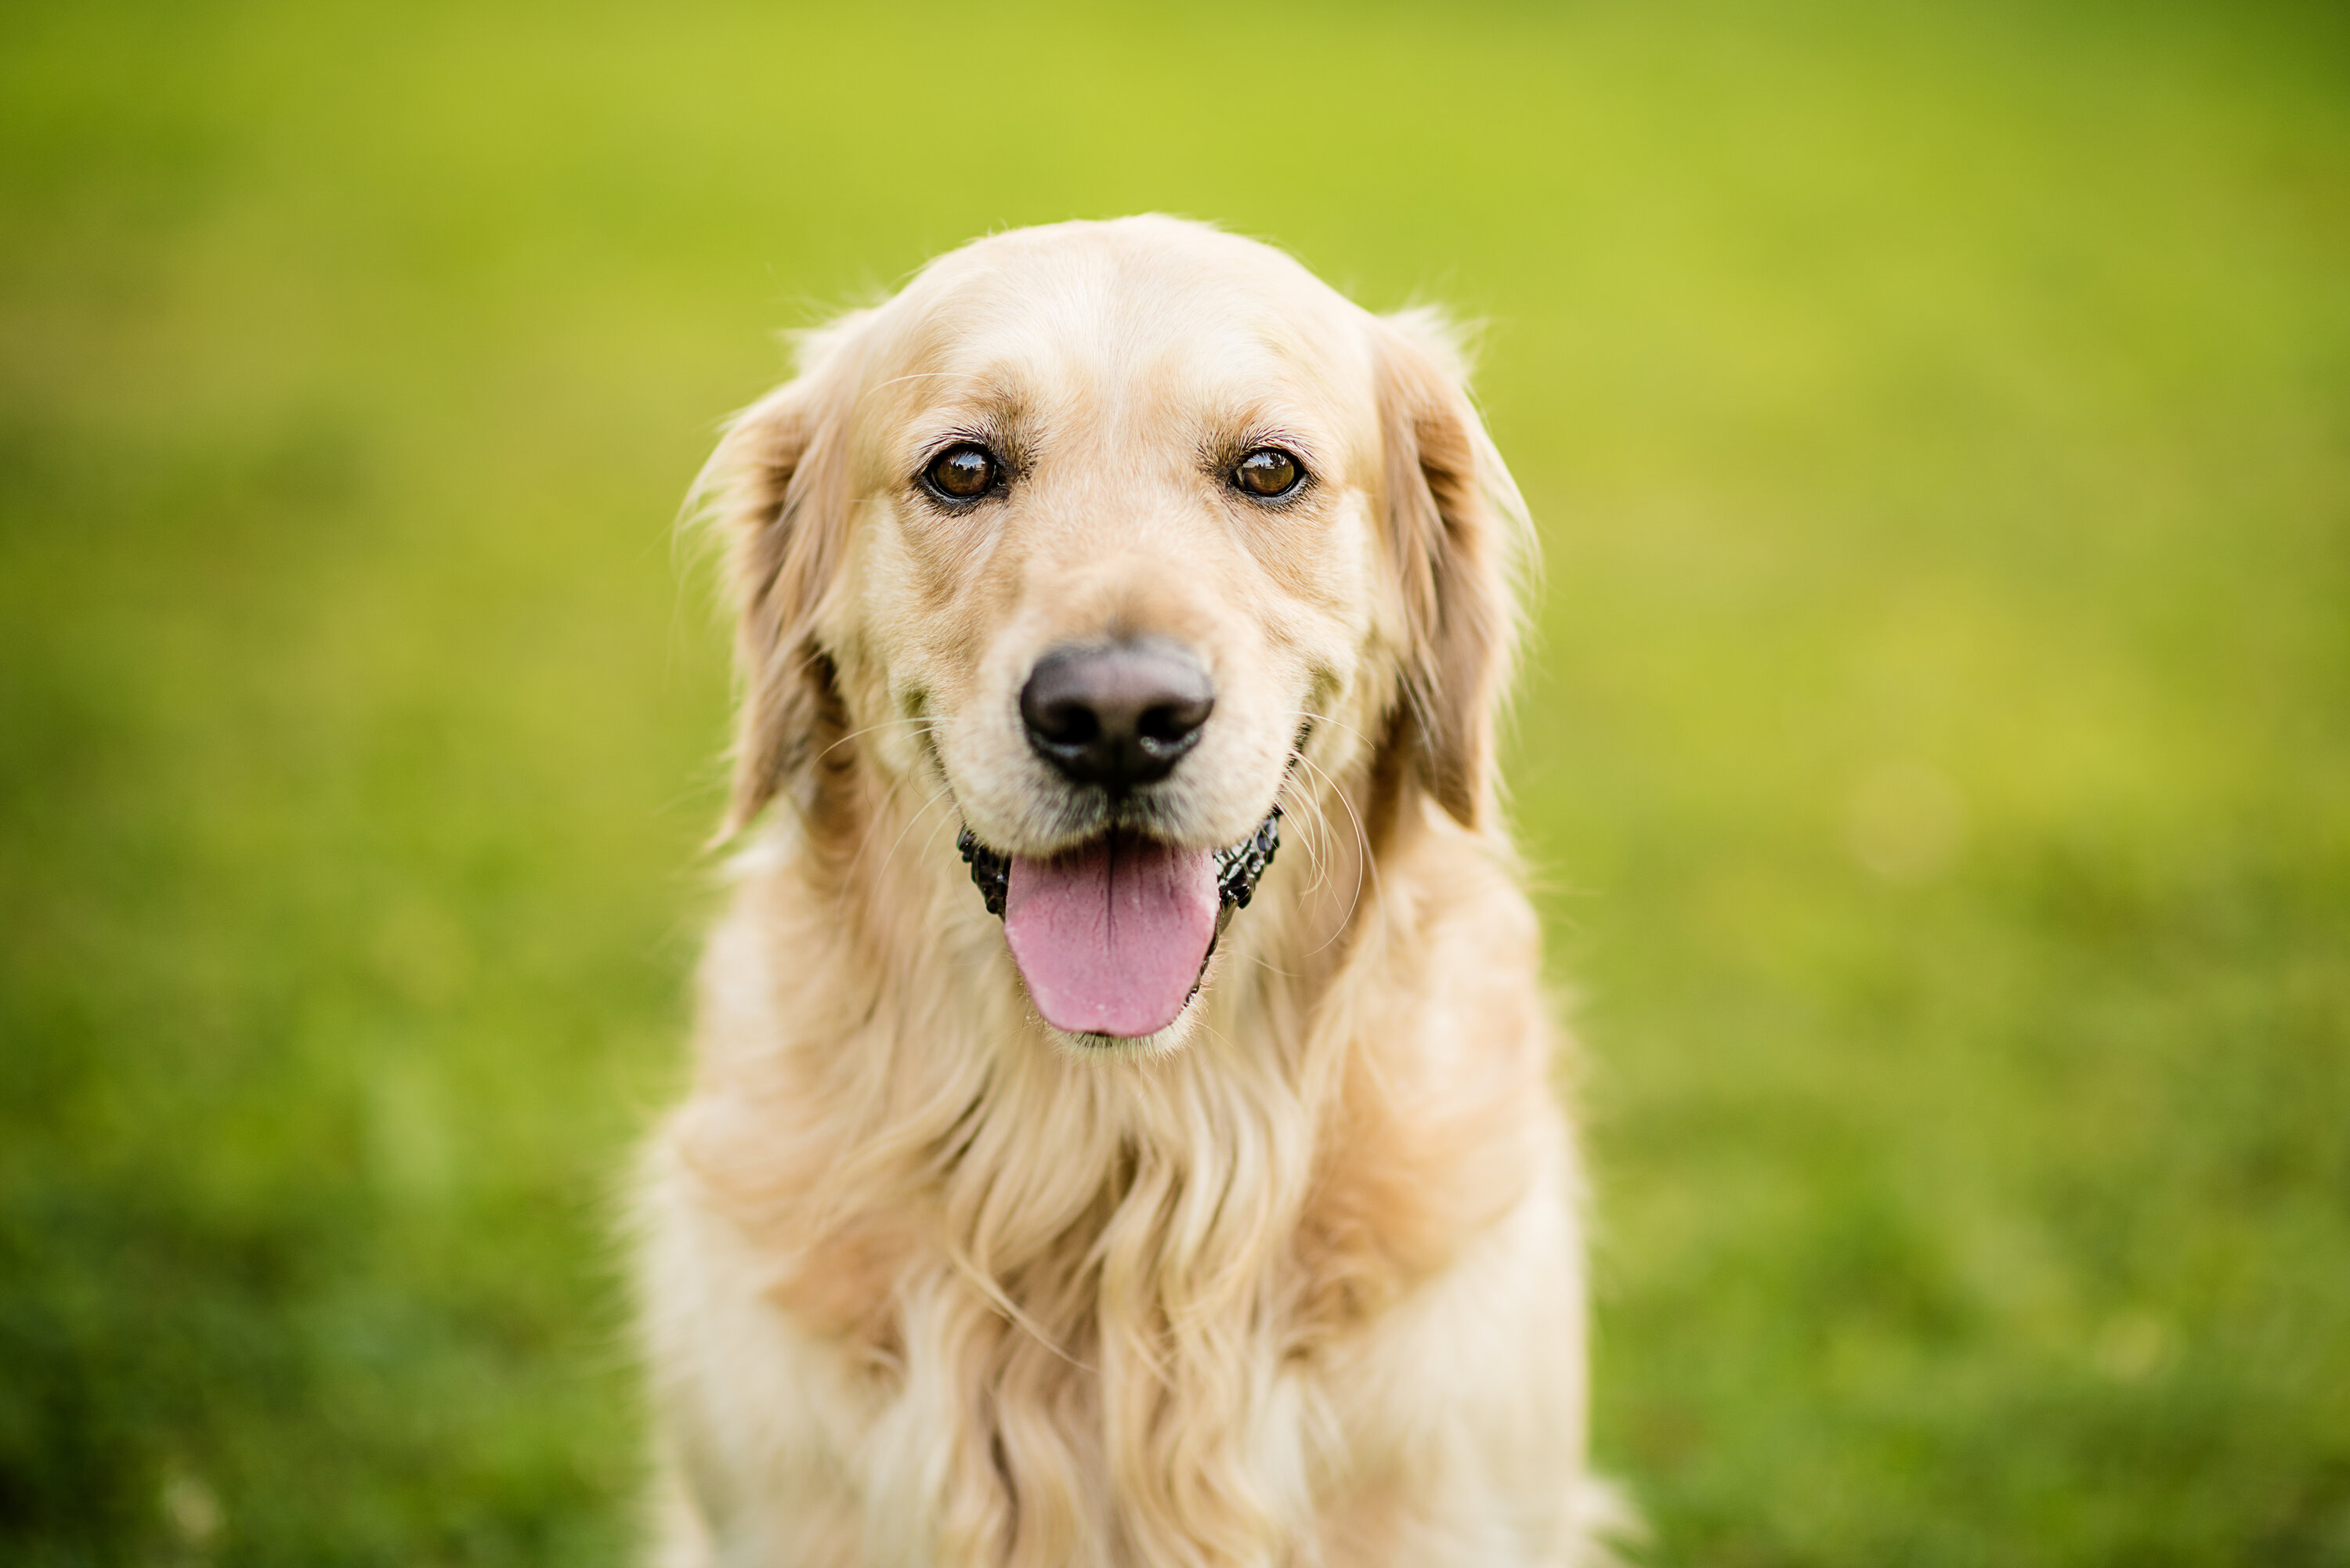 A close-up of a Golden Retriever looking at the camera with grass in the background